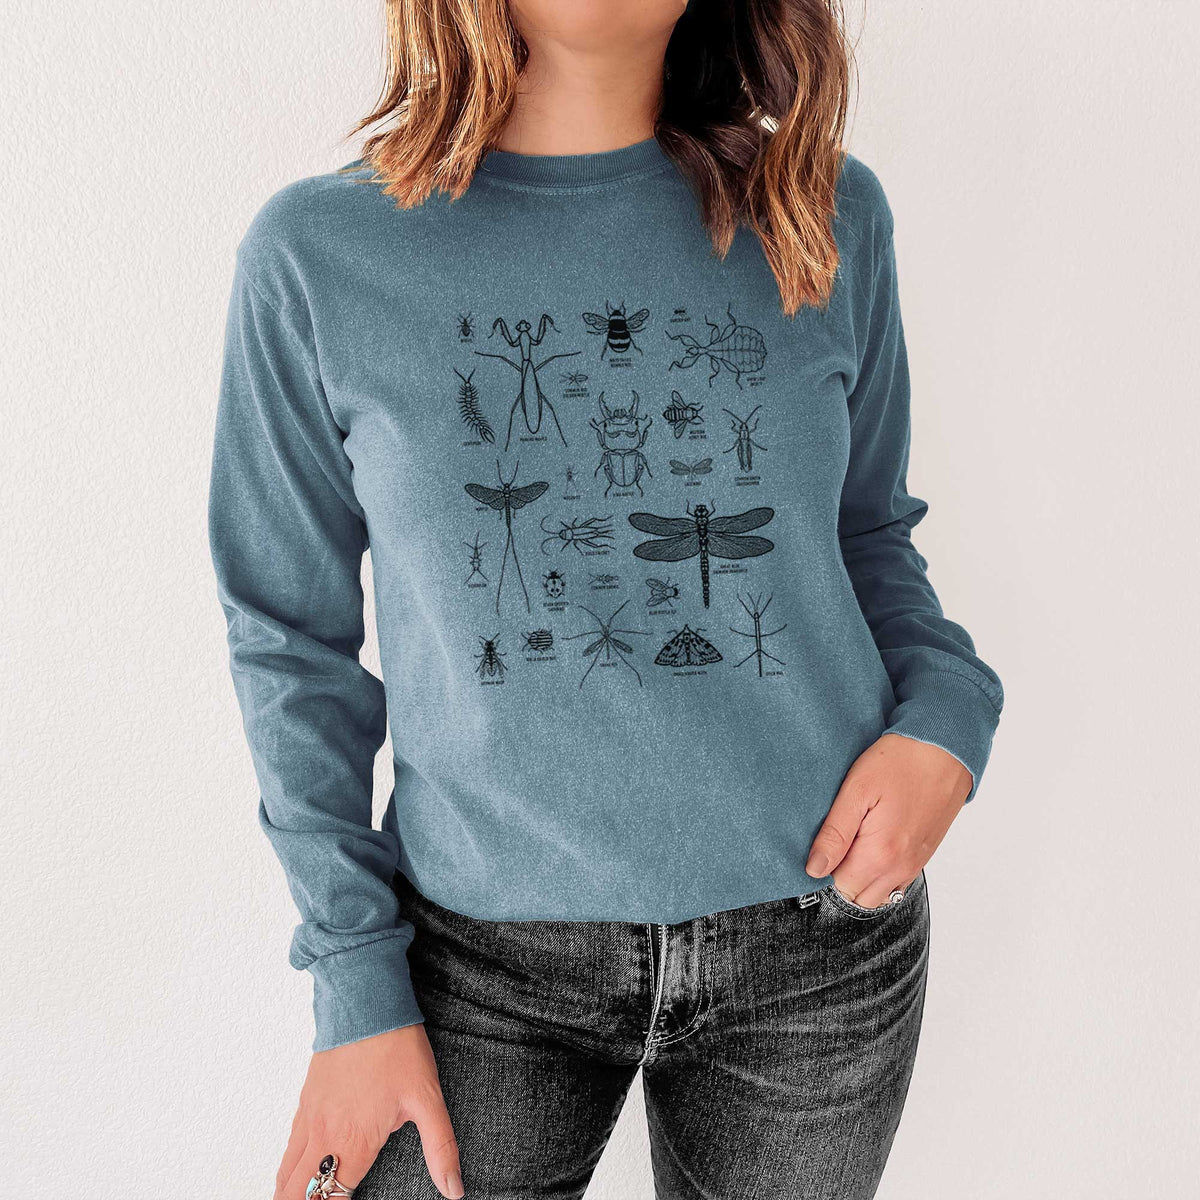 Chart of Arthropods/Insects - Heavyweight 100% Cotton Long Sleeve